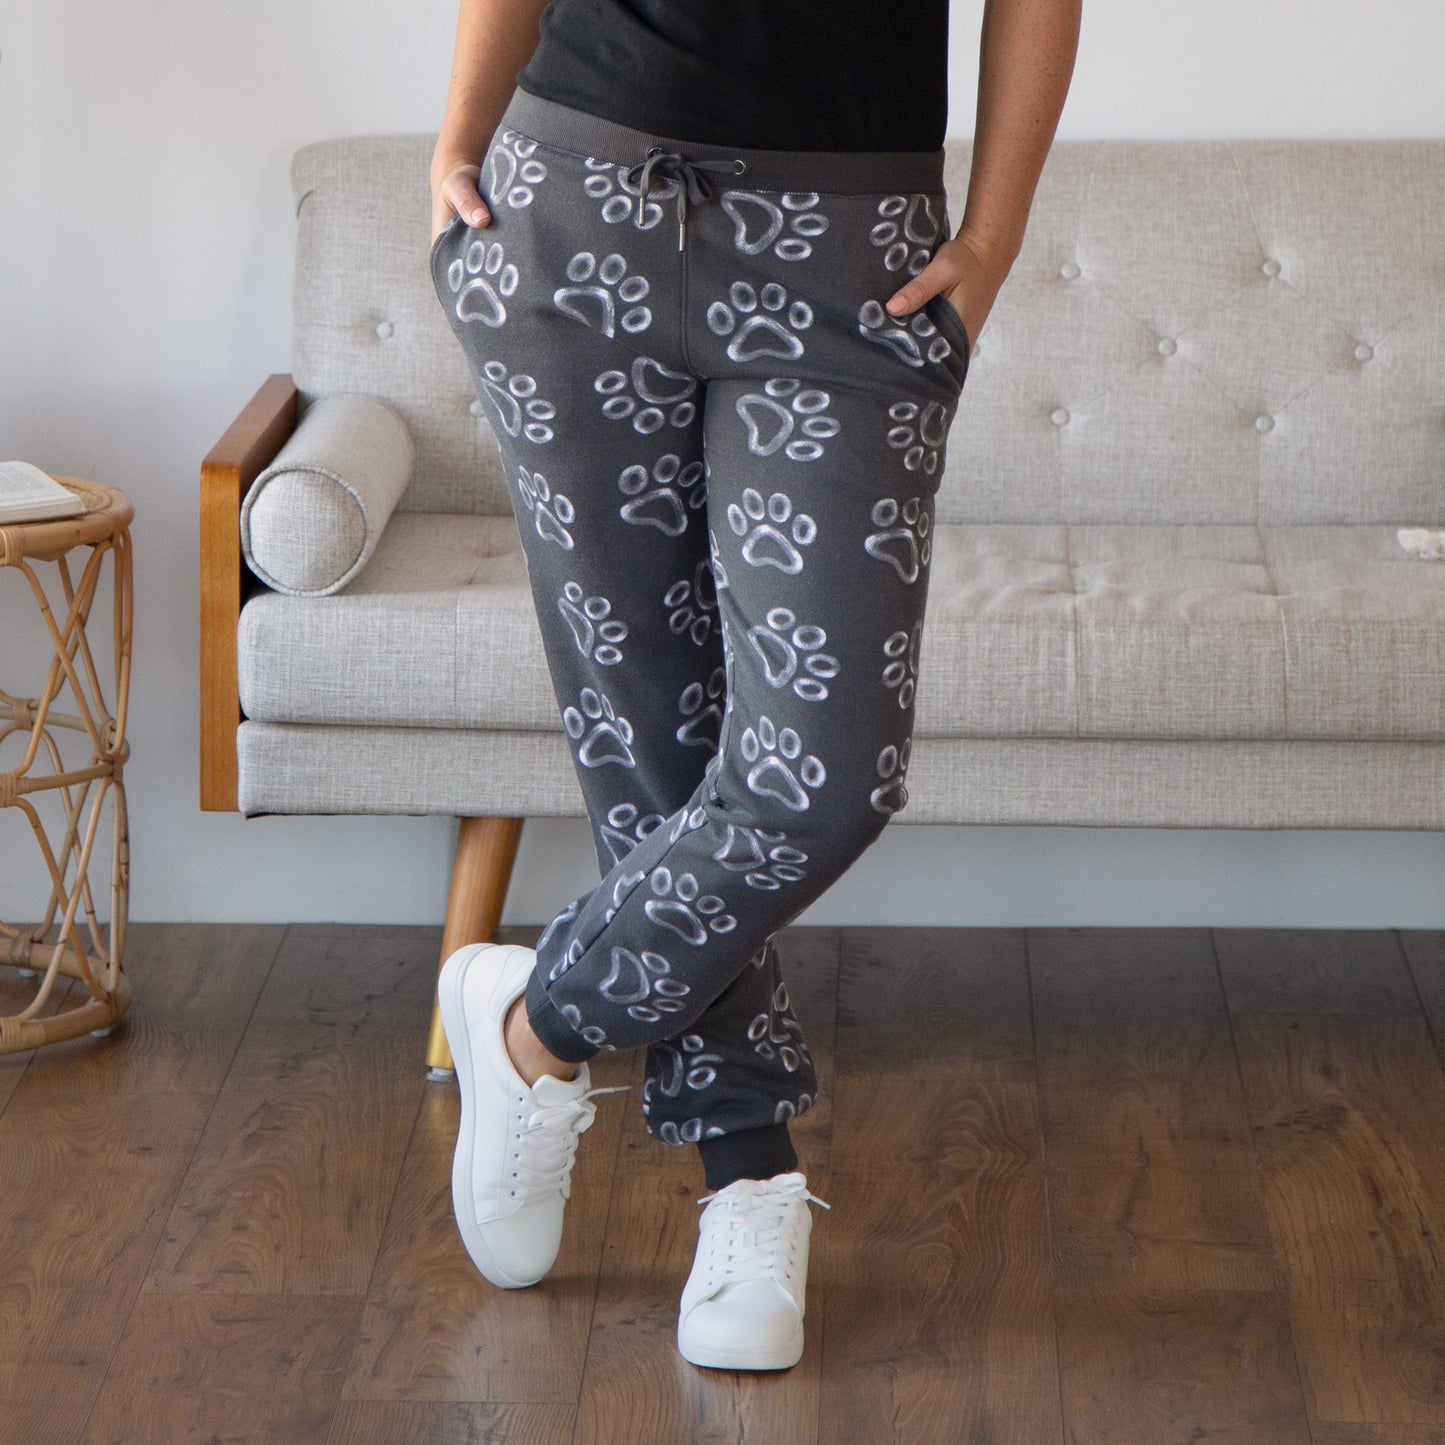 All Over Chalk Paw Sweatpants